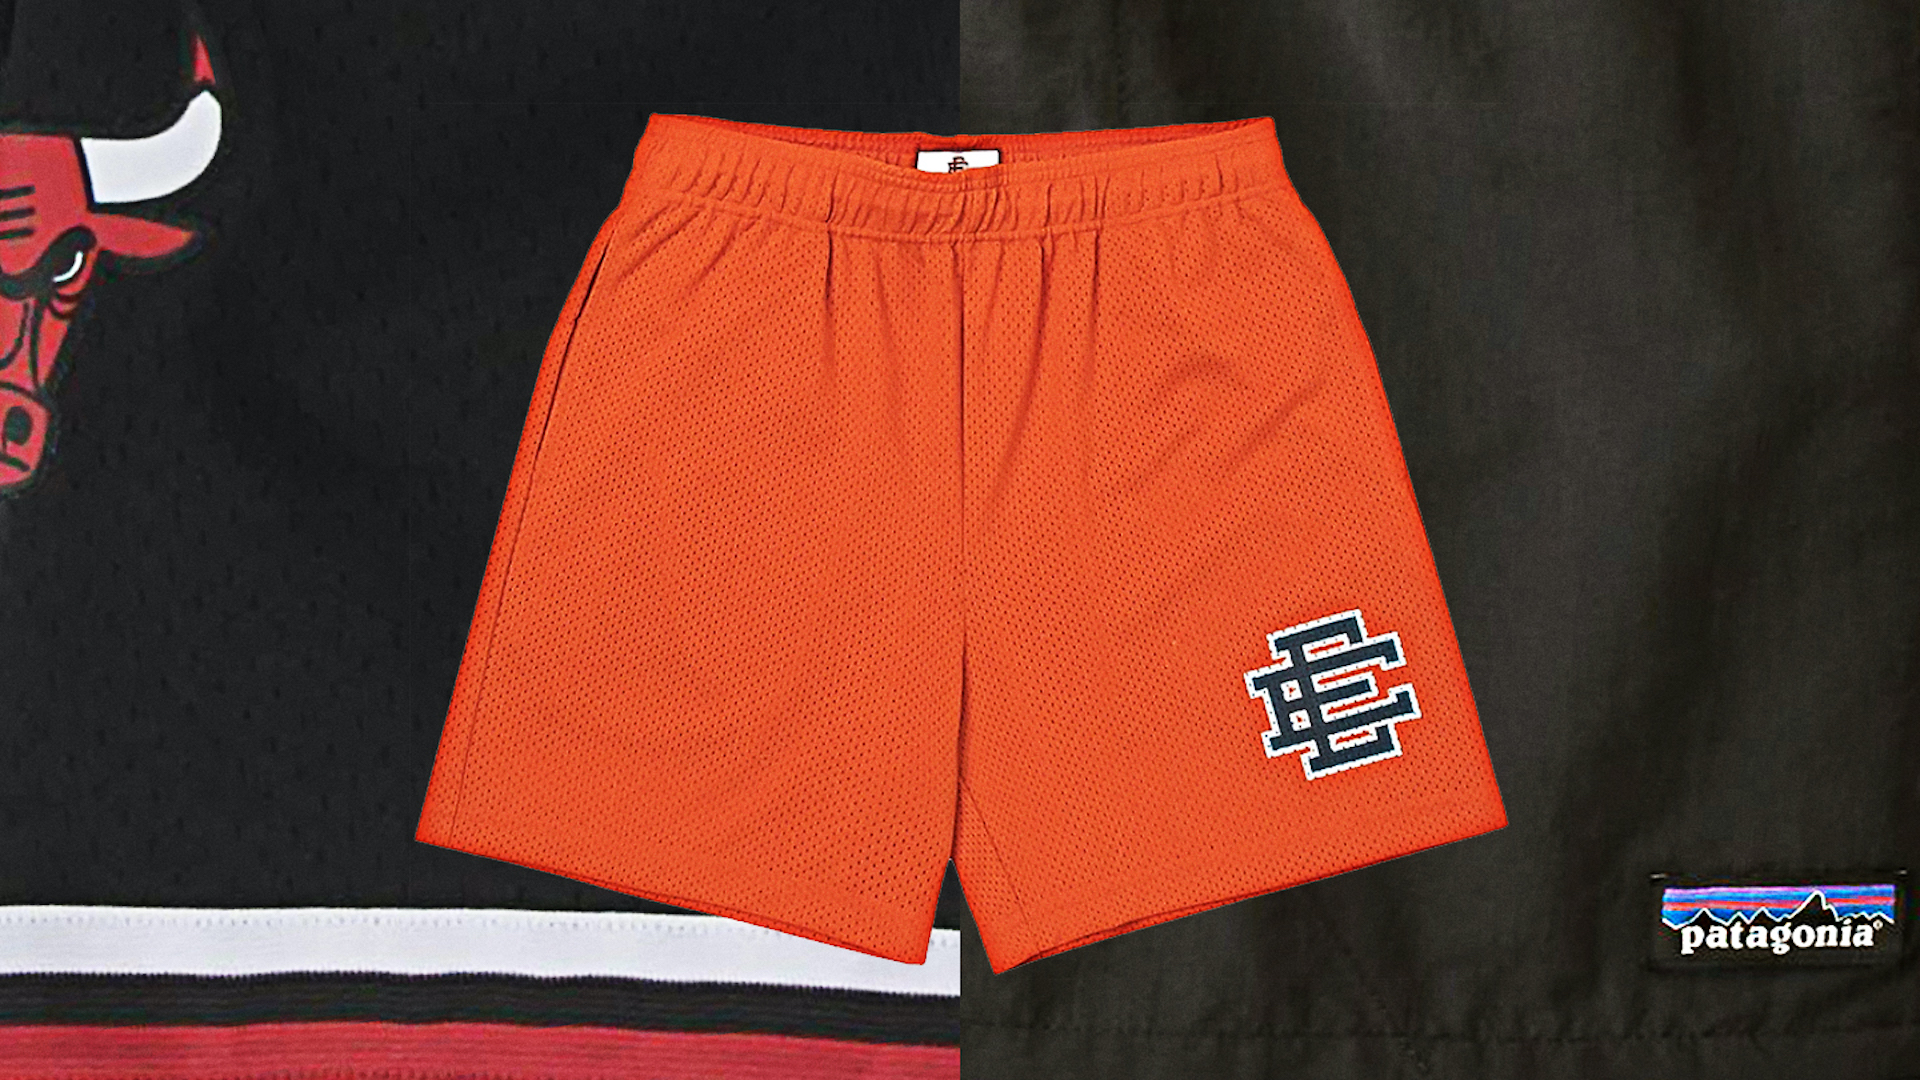 Trendsetting plain basketball shorts For Leisure And Fashion 